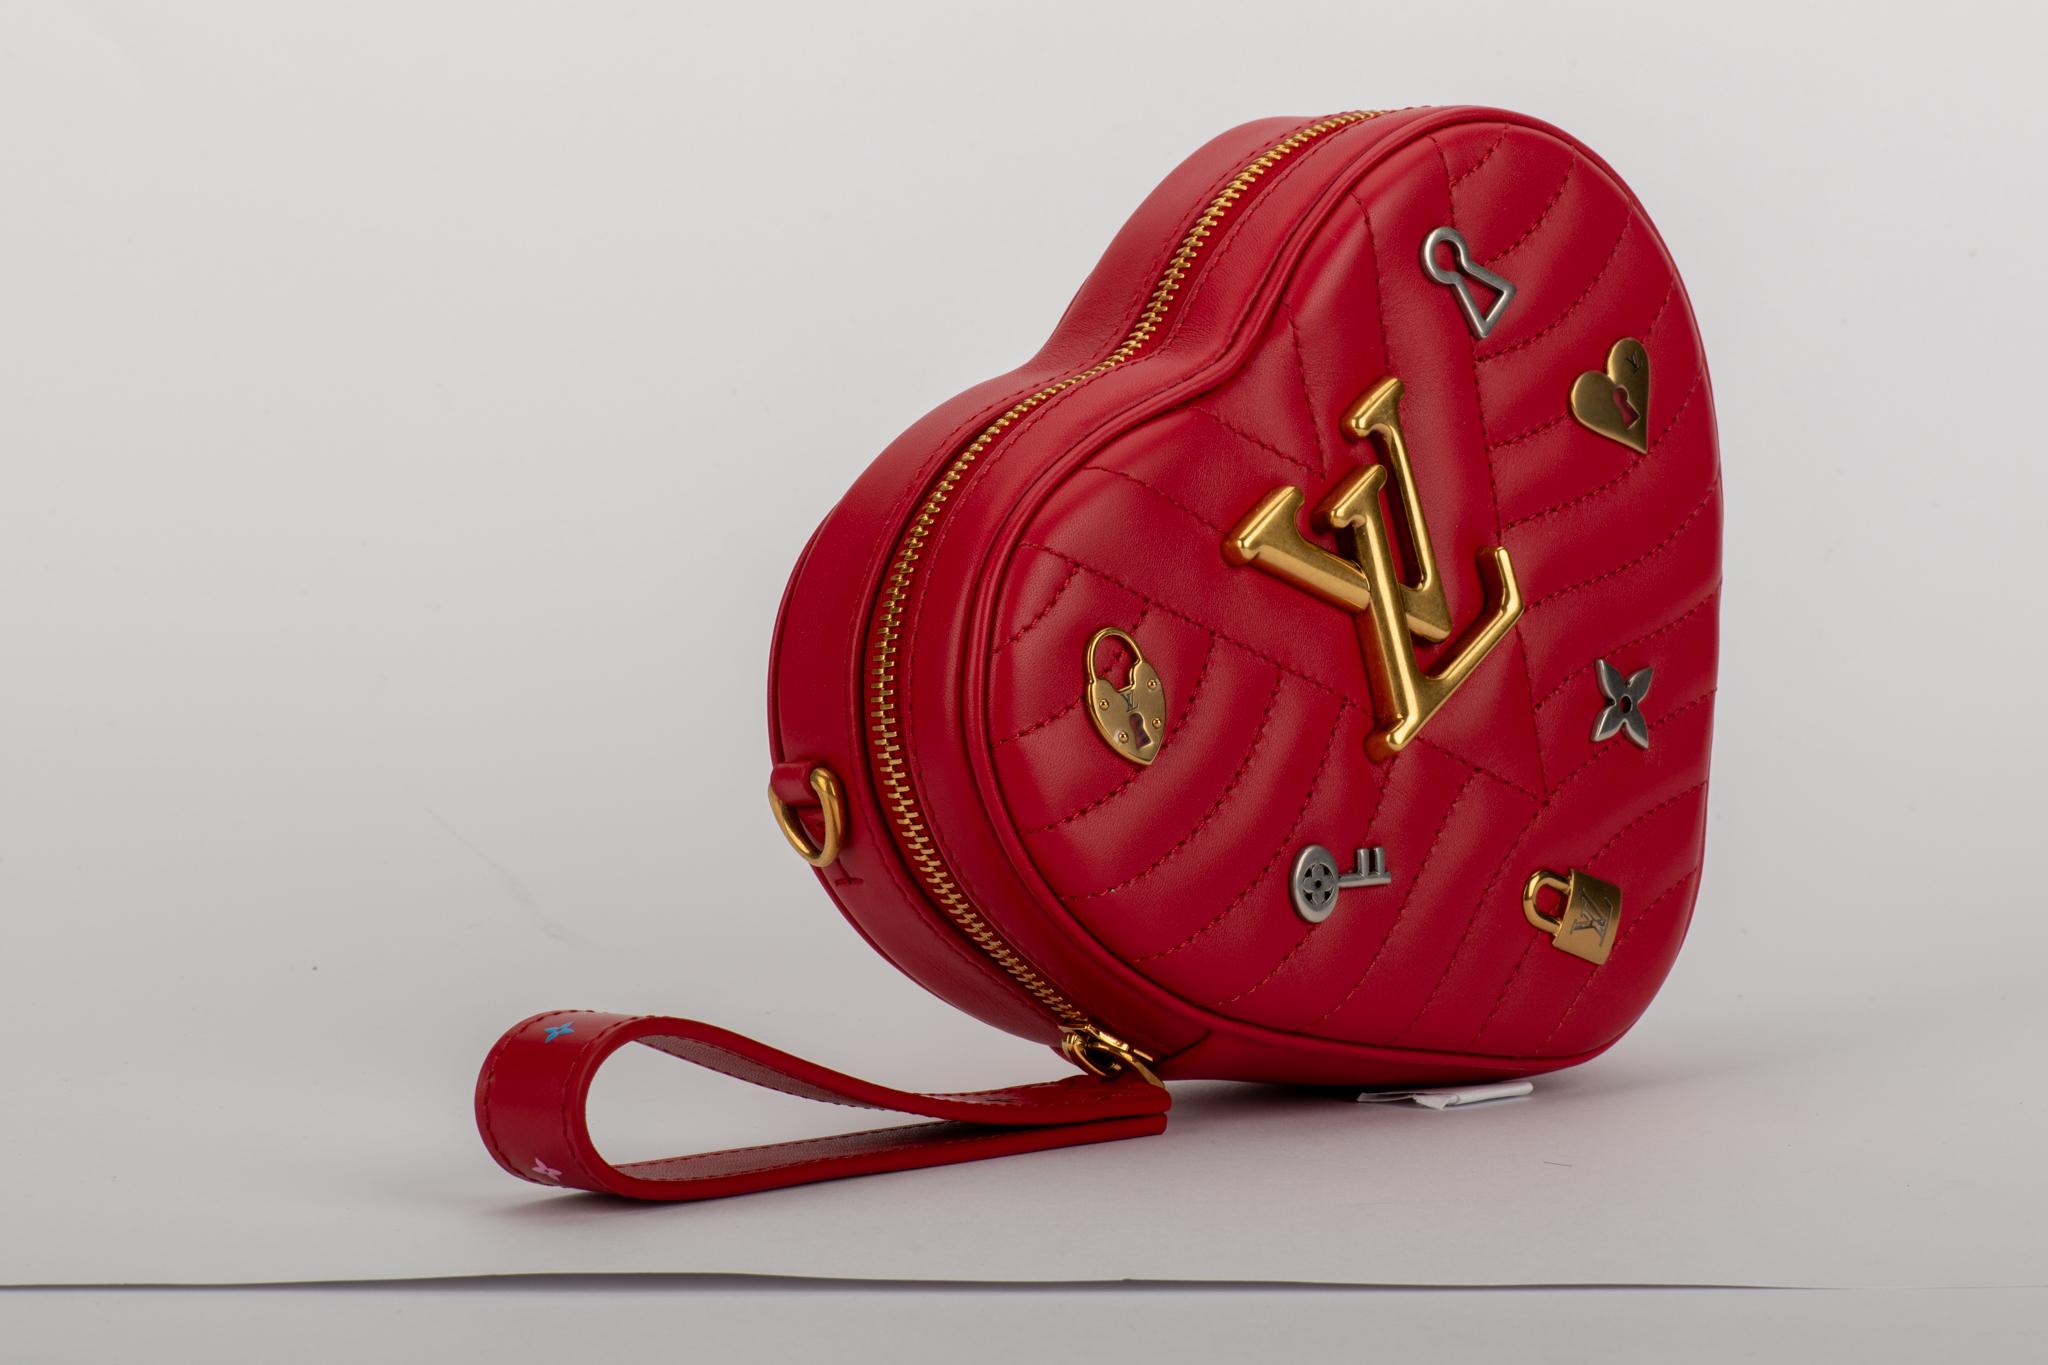 Louis Vuitton limited edition heart shape red leather bag with logo silver and gold charms. Can we born as a clutch, waist bag or cross body bag. Shoulder strap 20